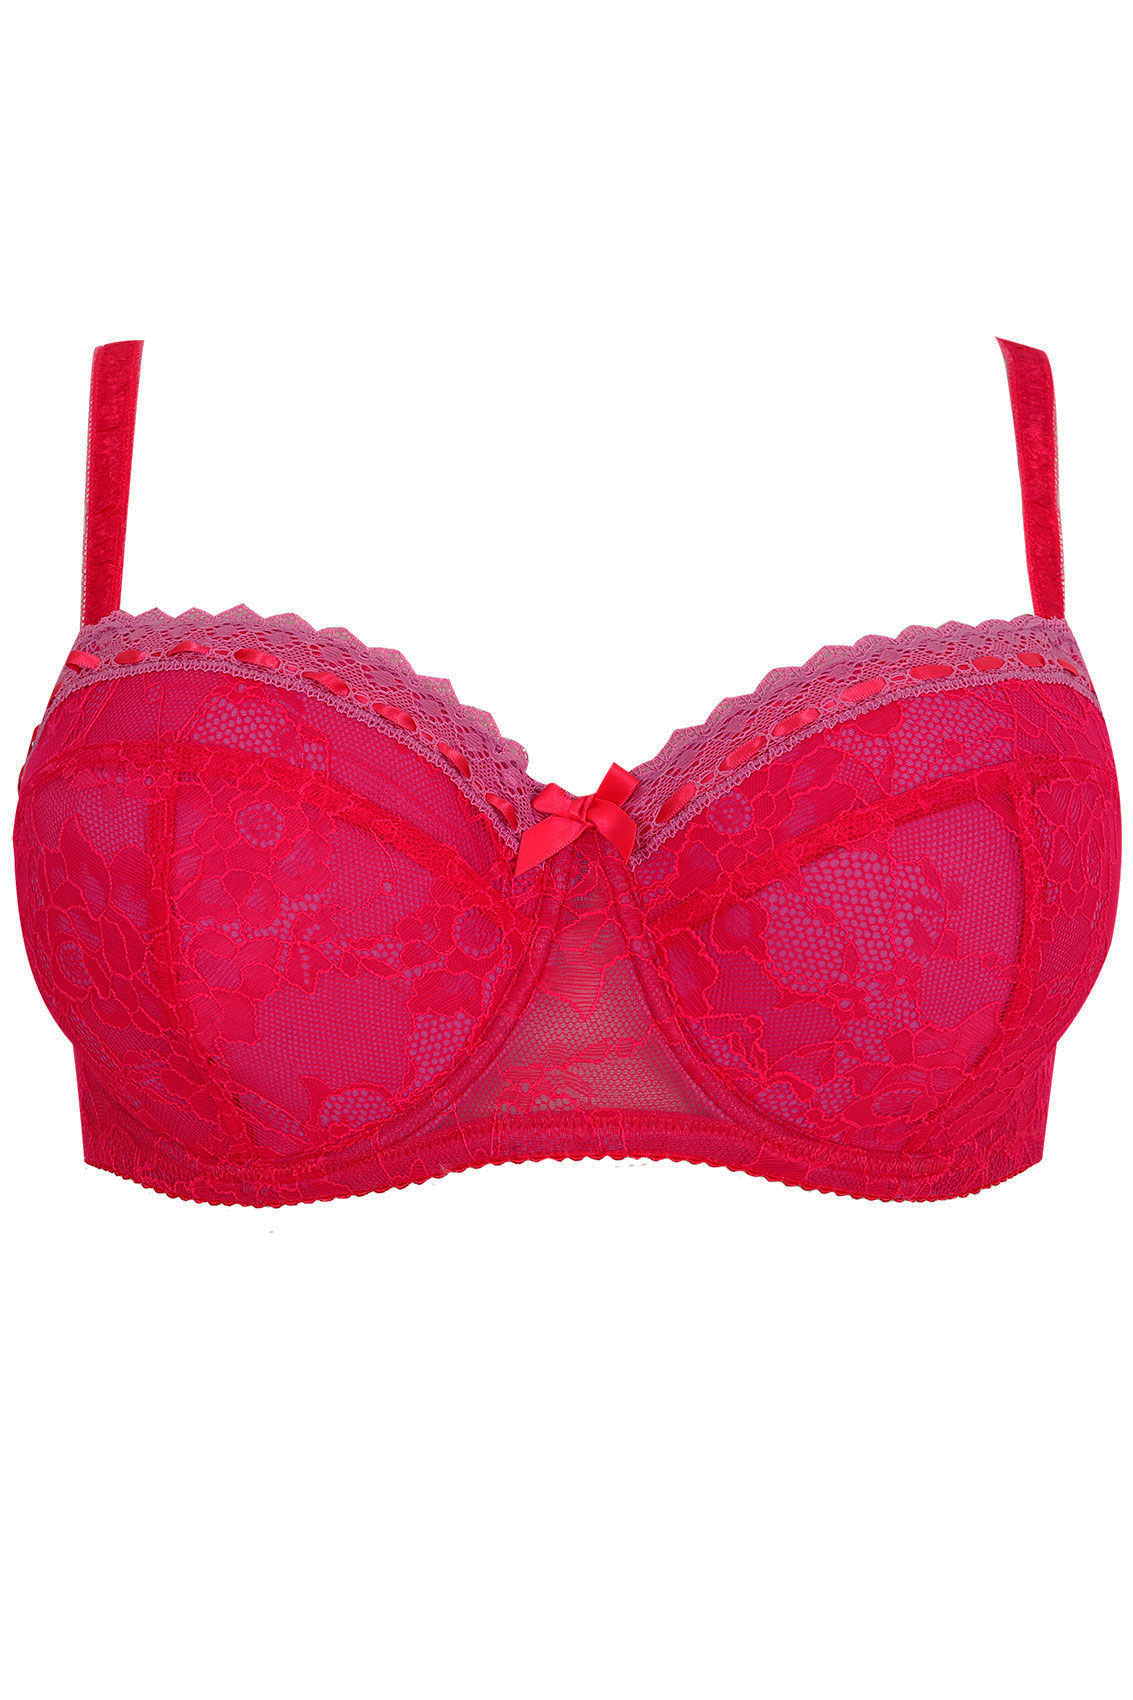 Pink & Red Overlaid Lace Moulded Balcony Bra plus size 38C - 46G